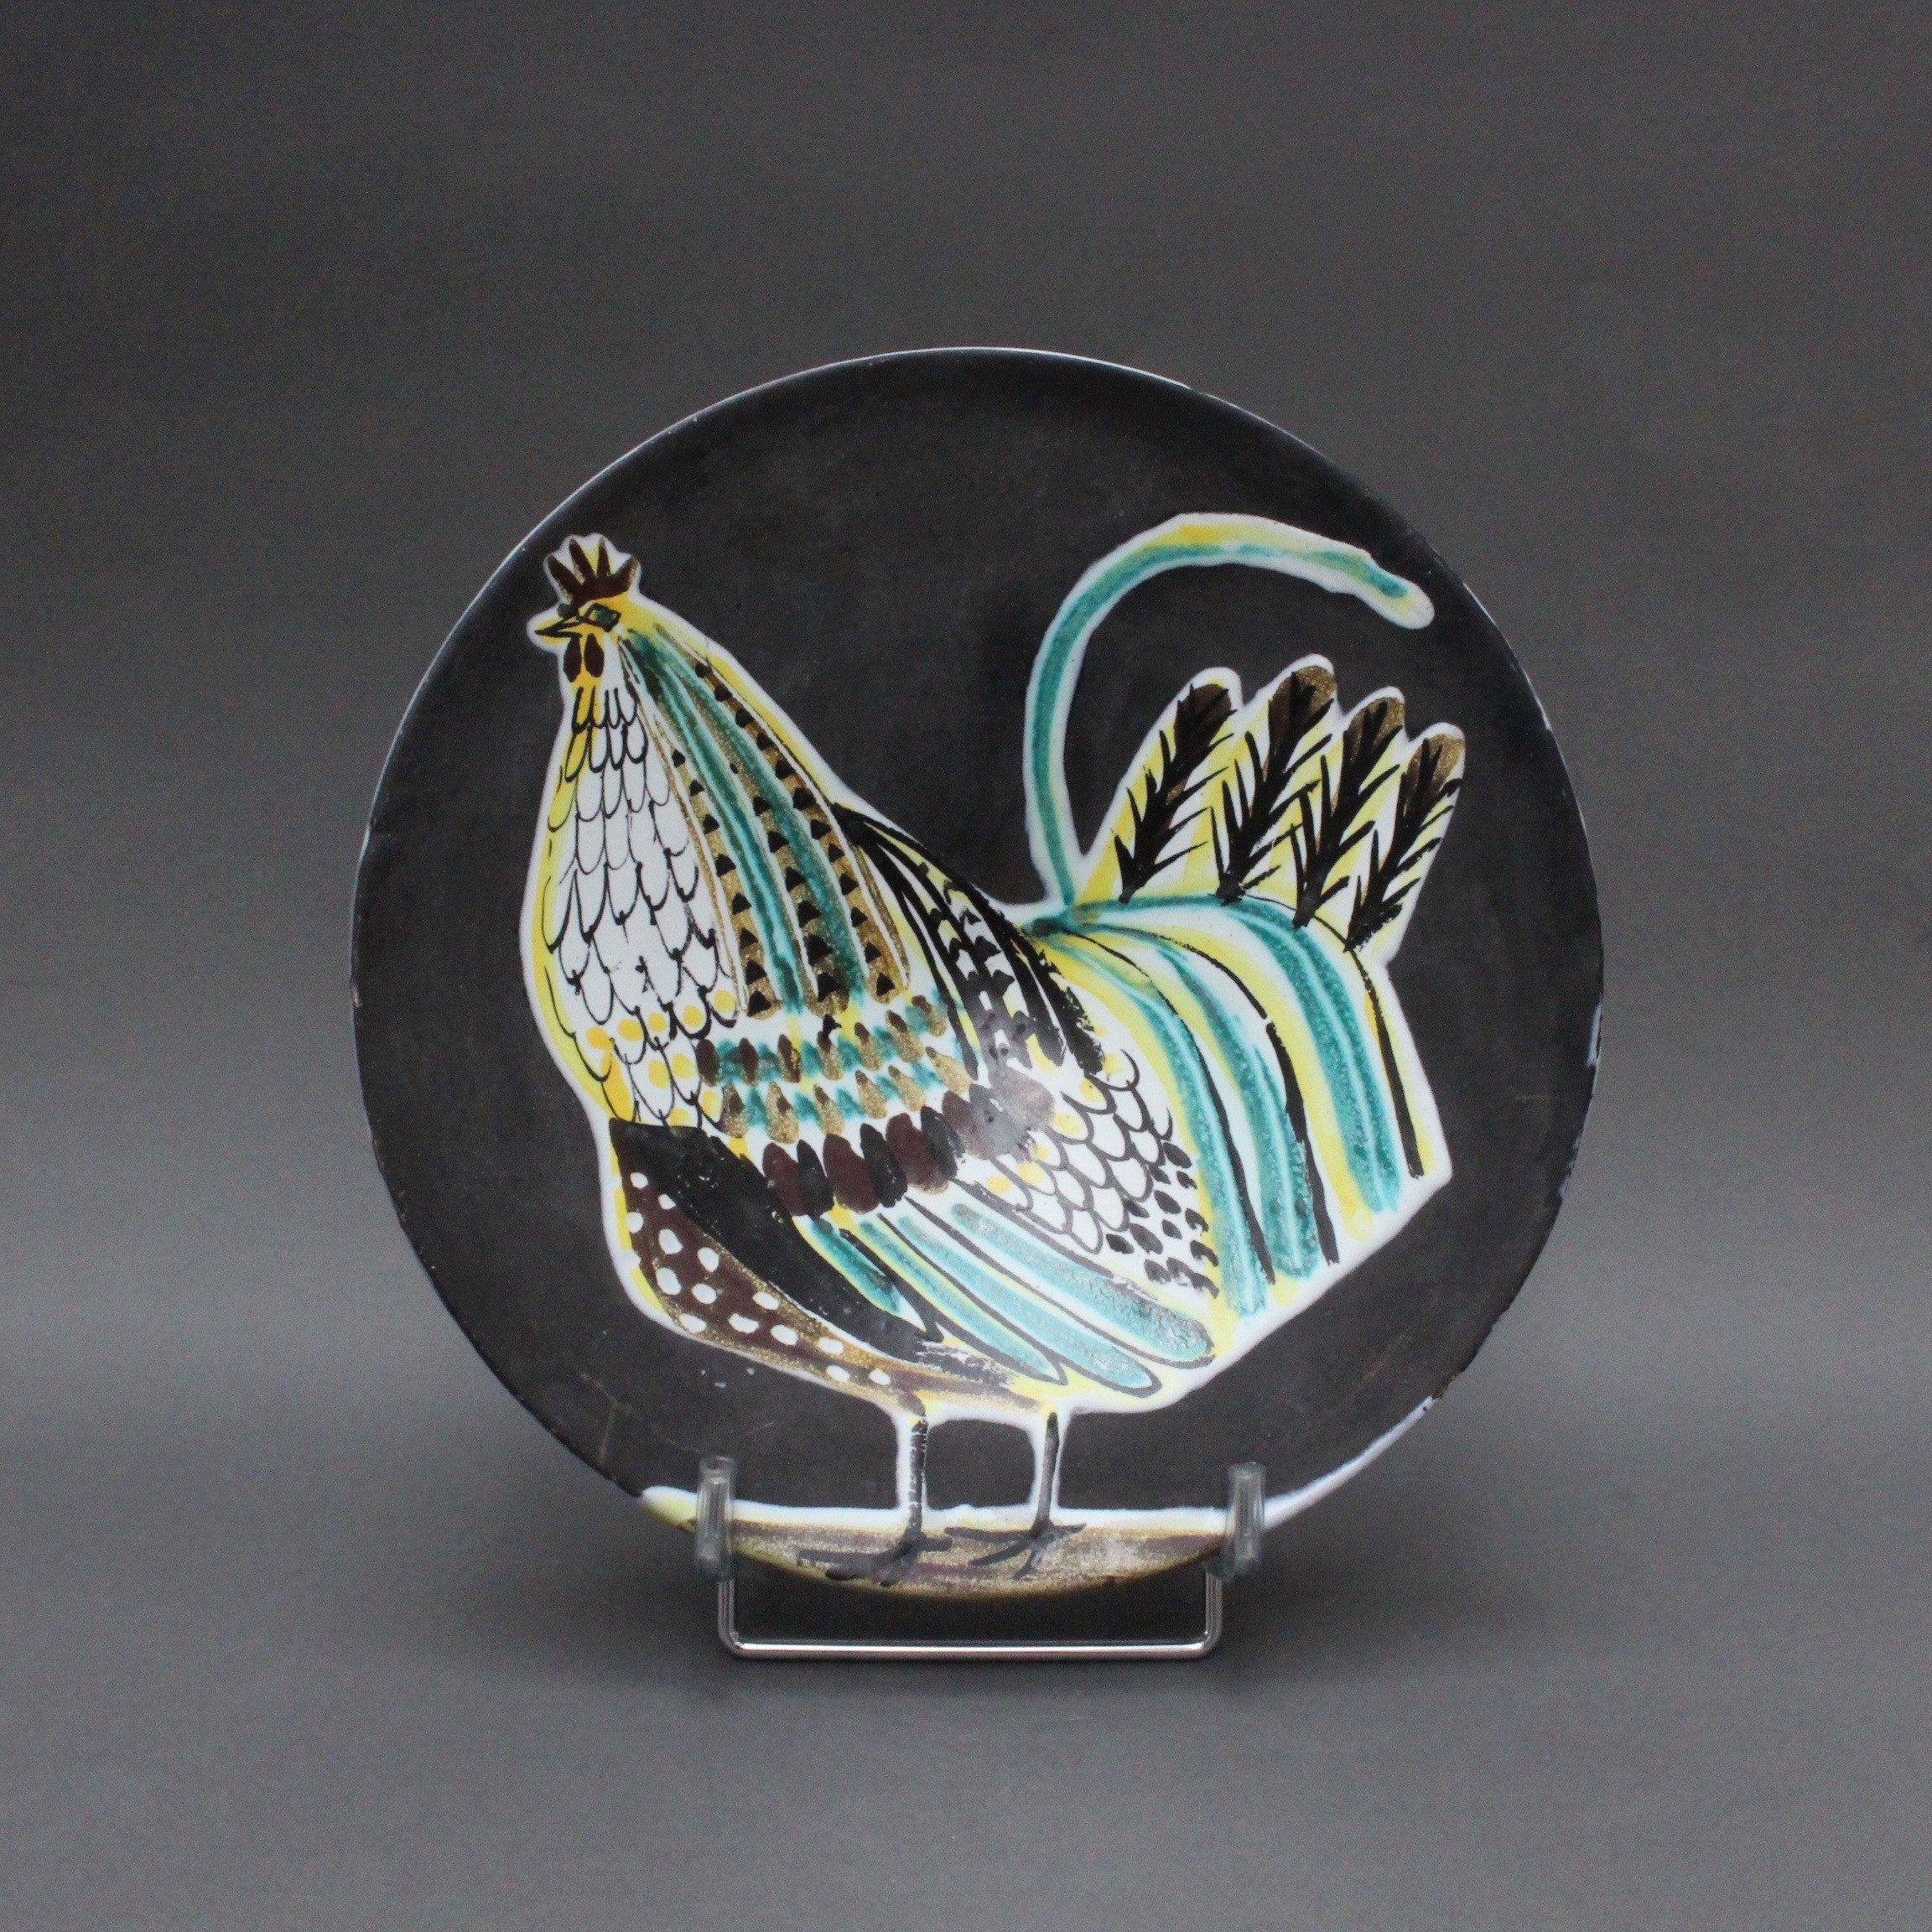 An absolutely stunningly beautiful rare decorative ceramic plate with French Coq (1950s) by ceramicist Roger Capron (1922-2006). Capron founded the Craft-based workshop in Vallauris, France, l'Atelier Callis, where his creations contributed to a